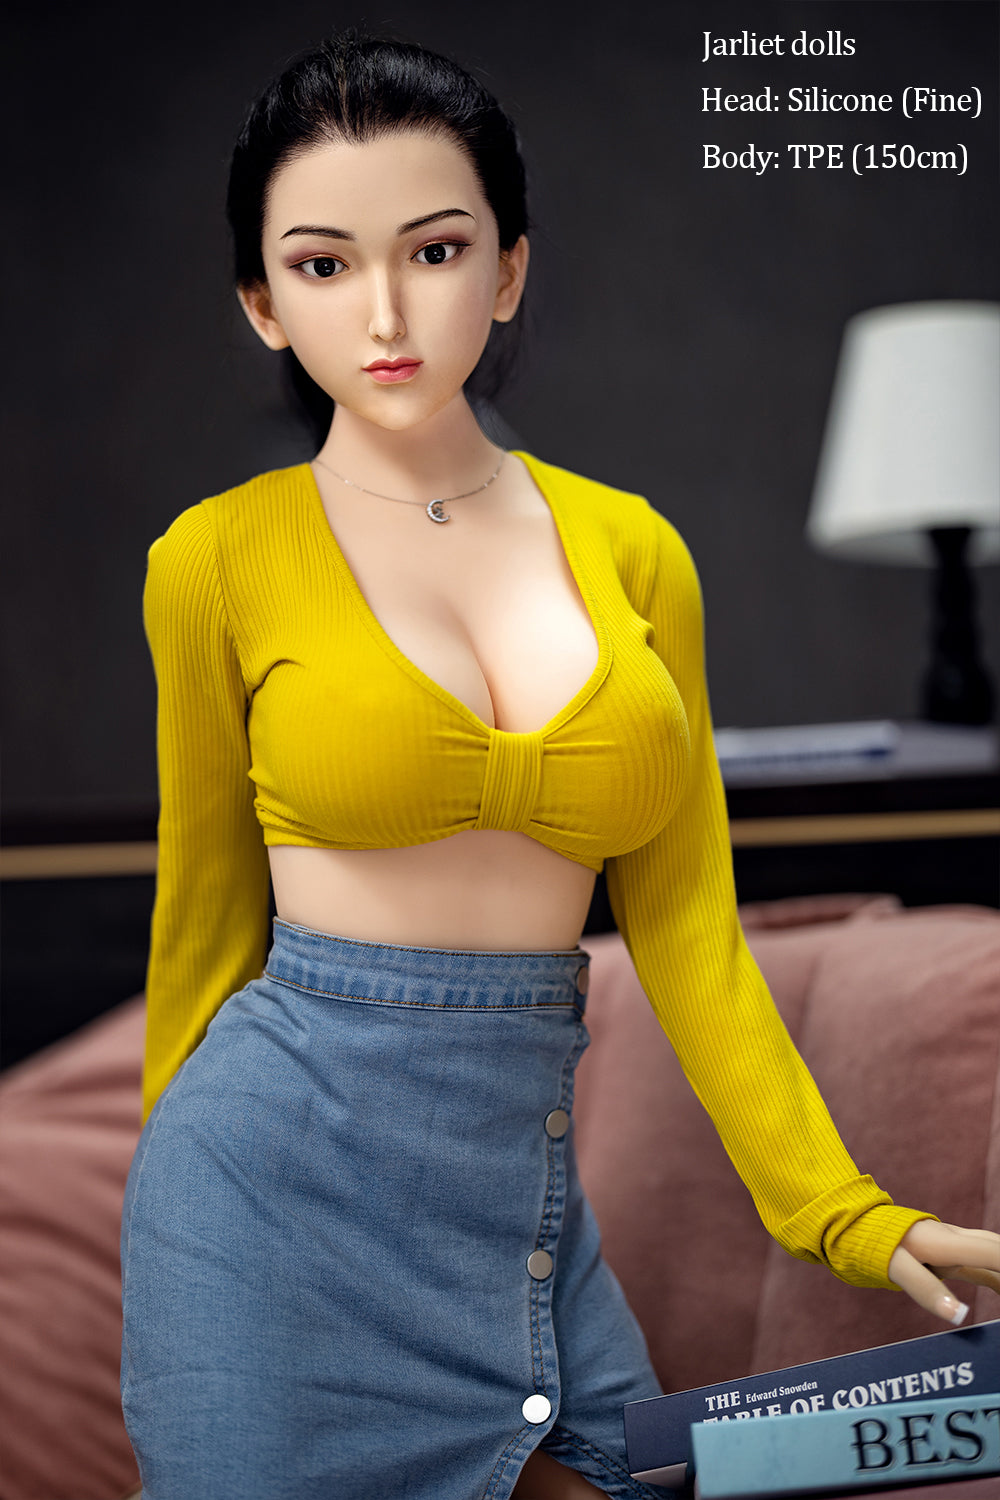 Oaklee (I-Cup) (150cm) | Sex Doll